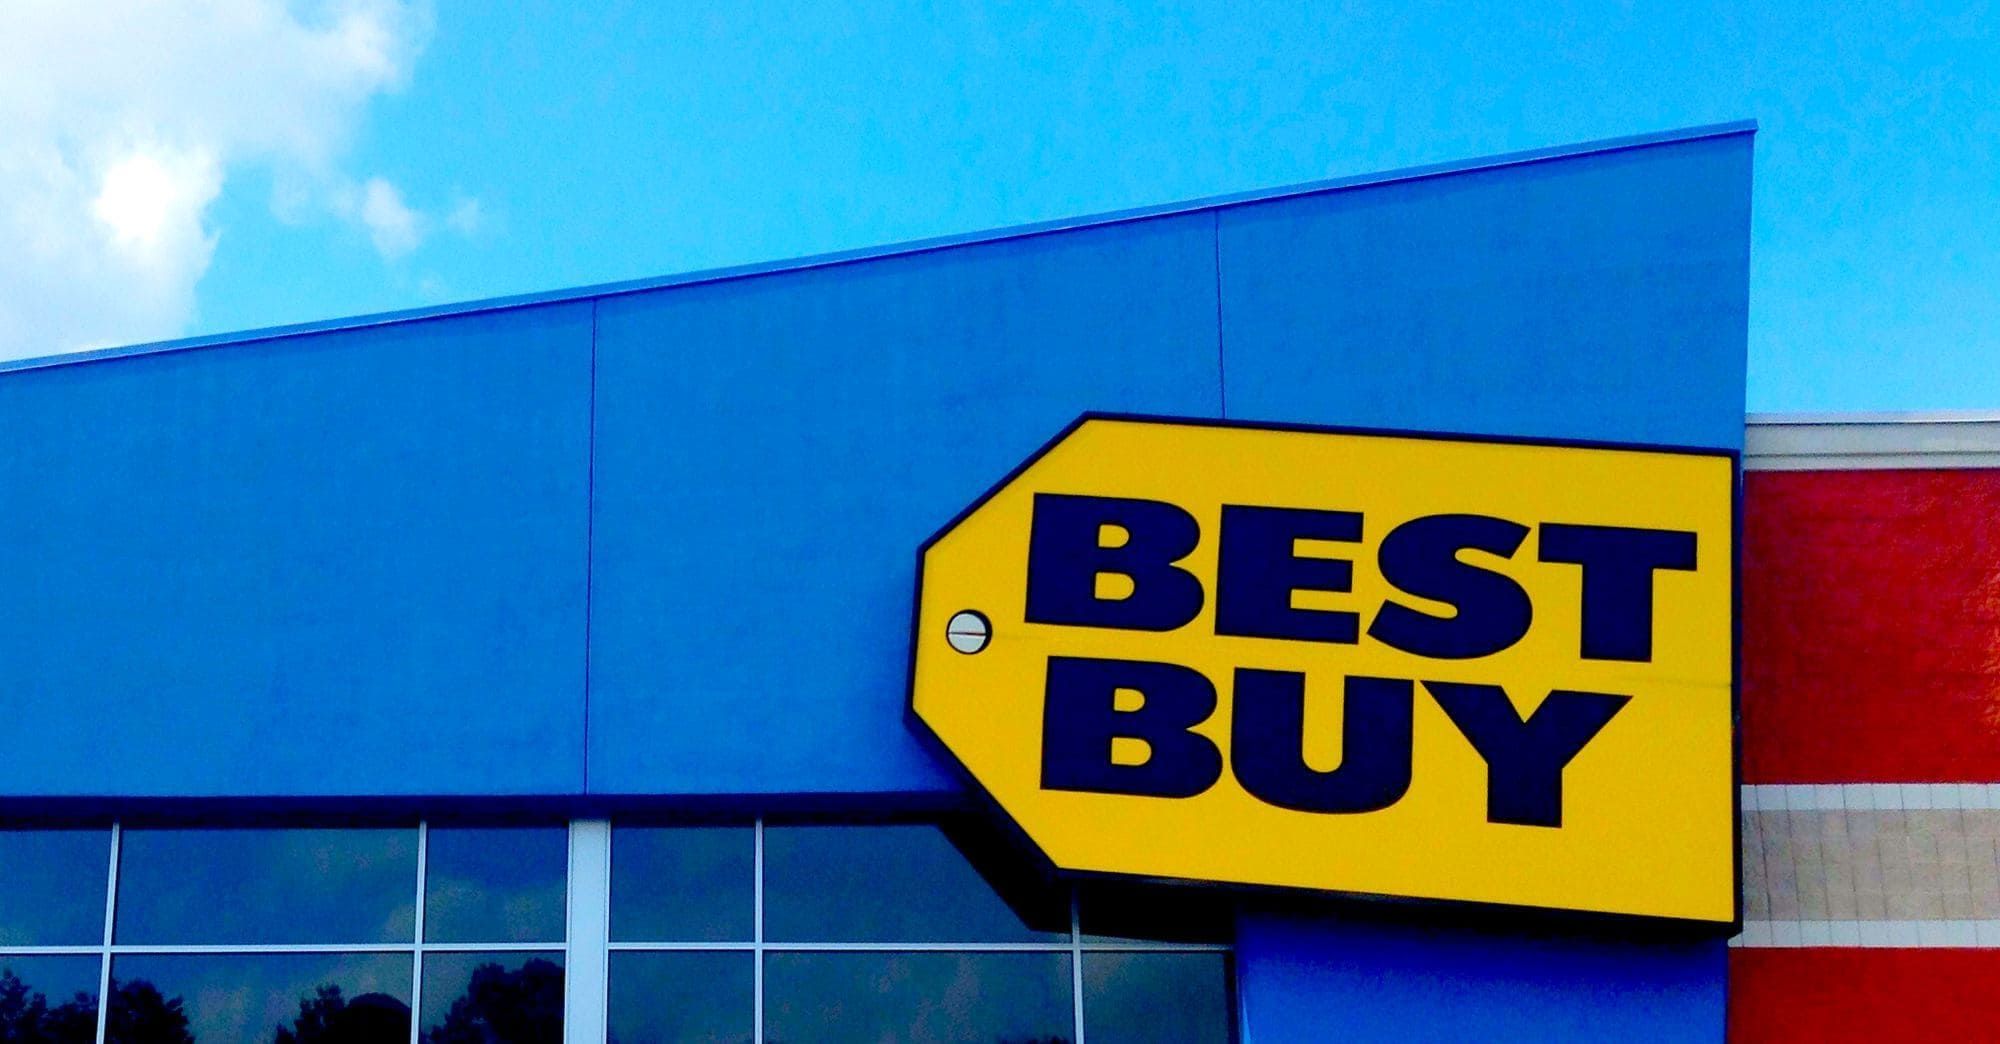 How to scrape Best Buy product data in 5 simple steps